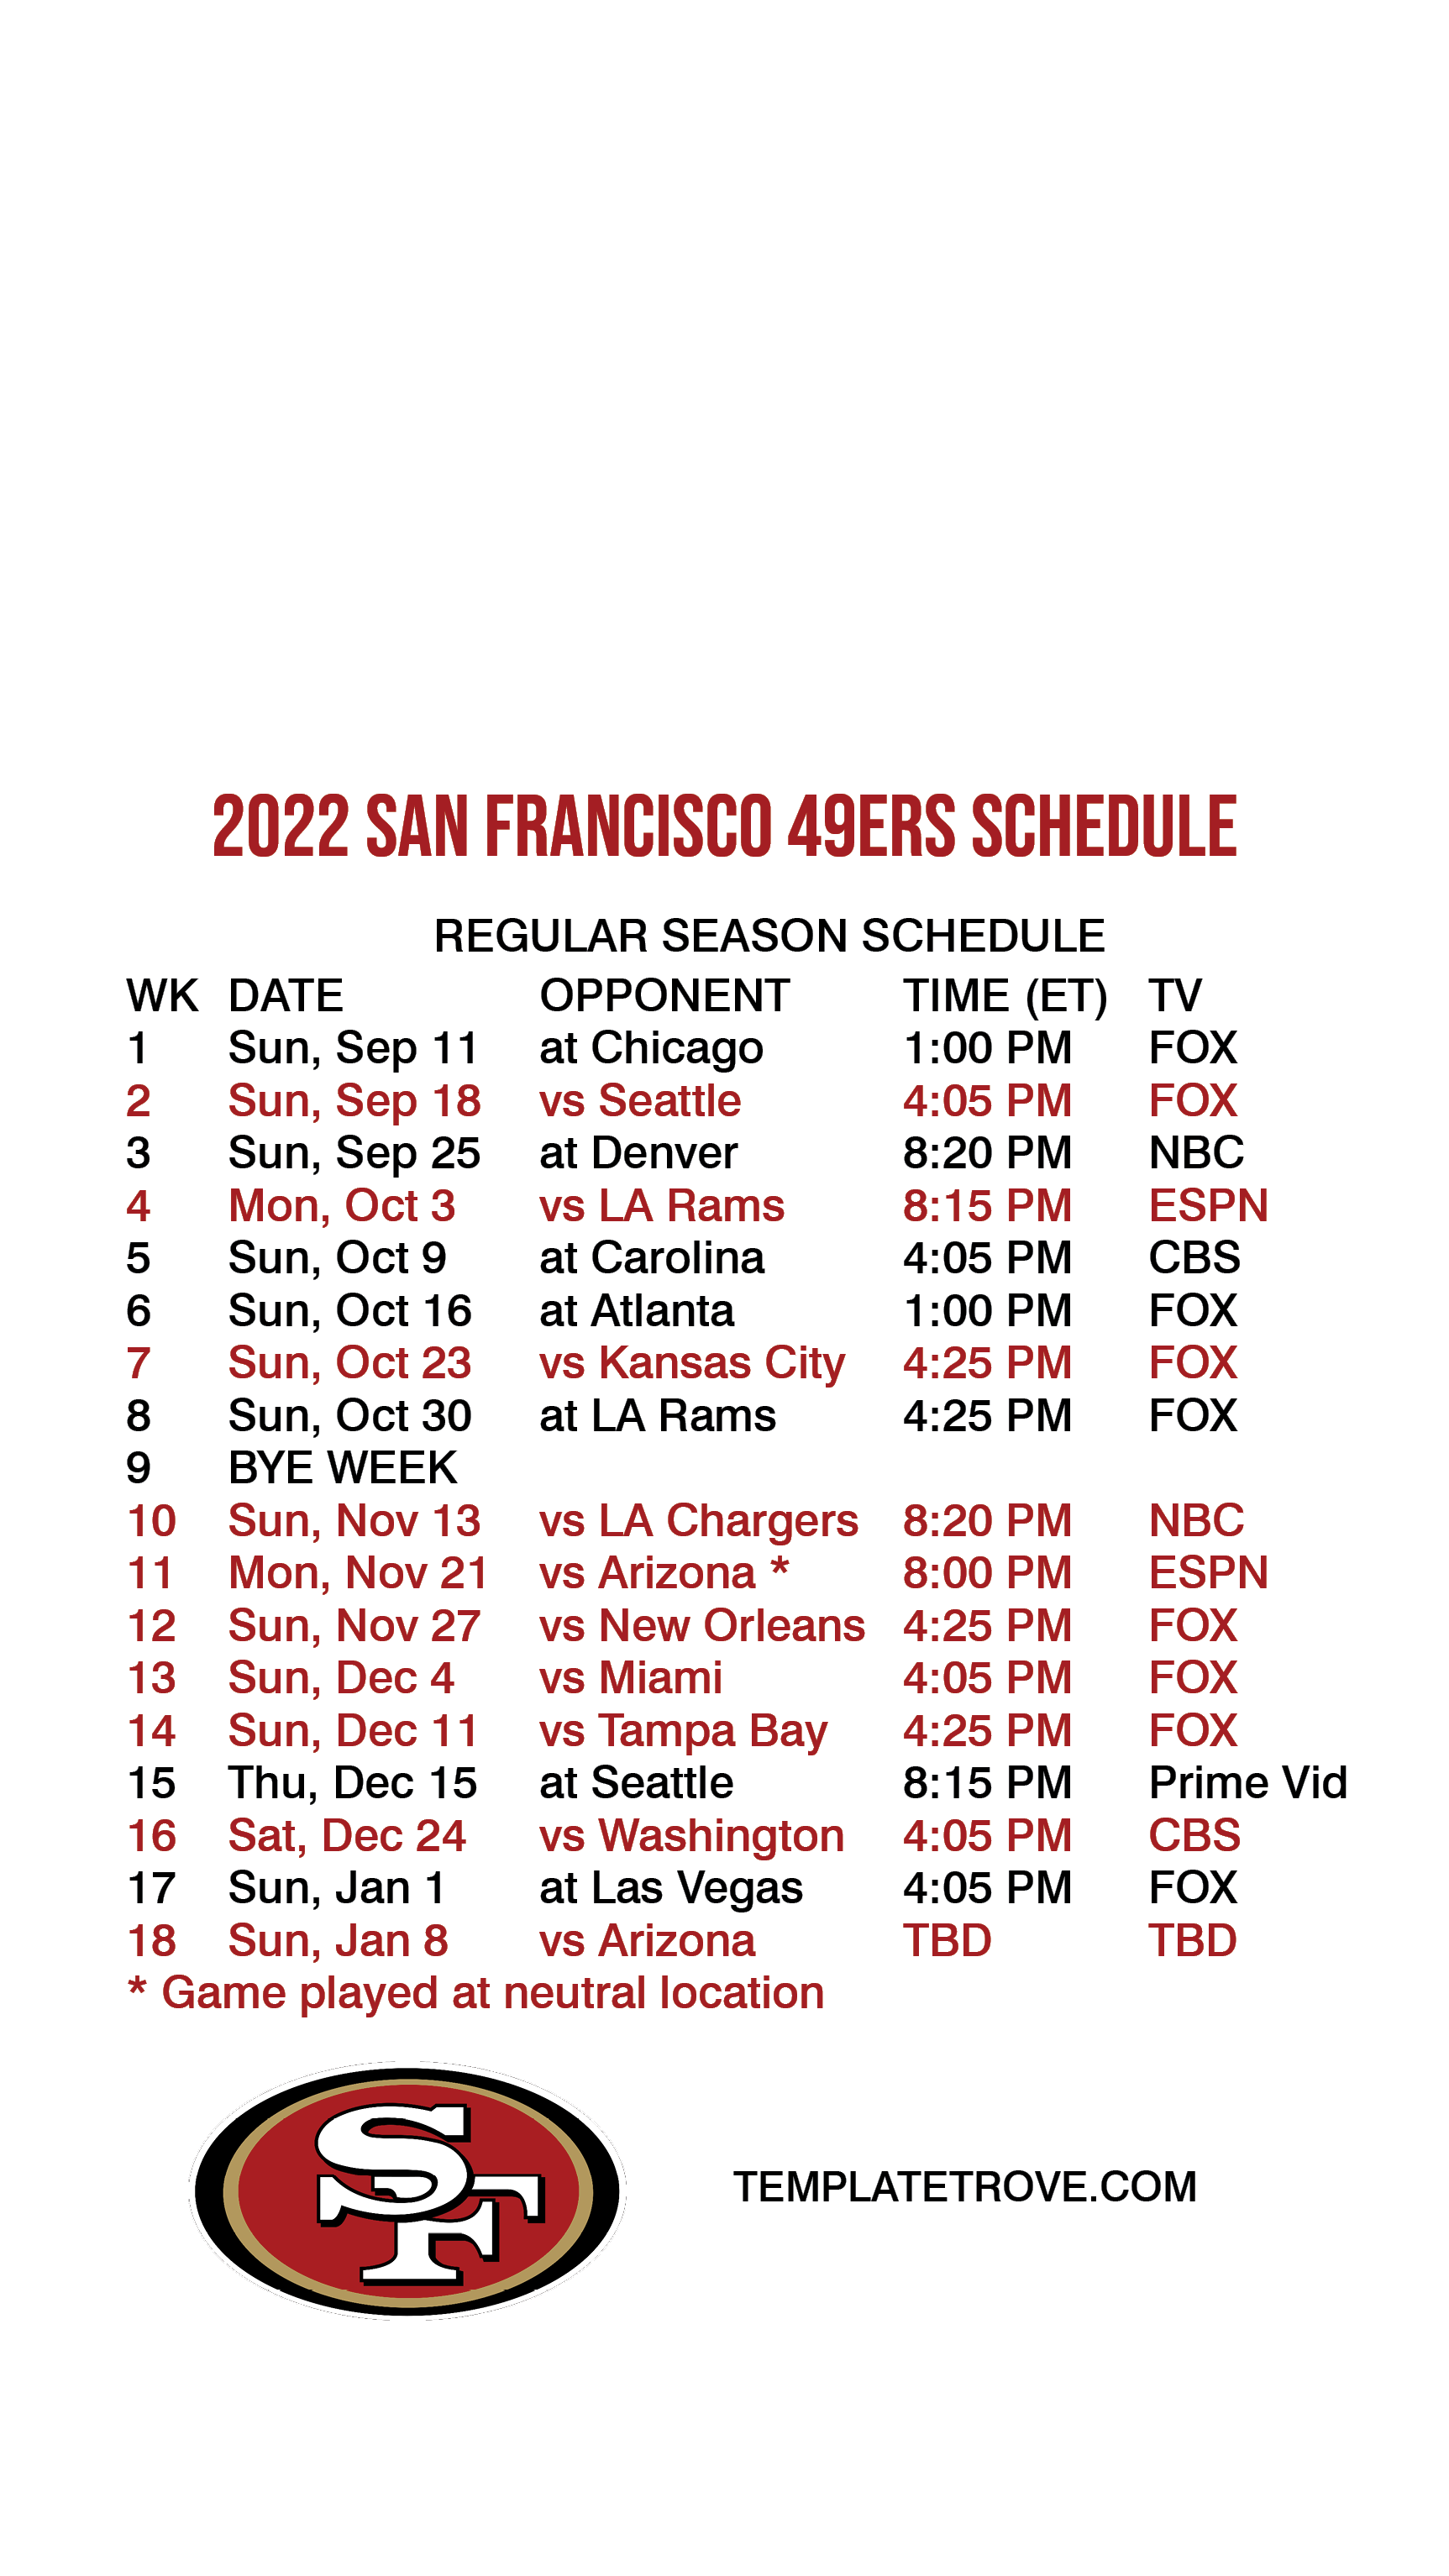 2022-2023 San Francisco 49ers Lock Screen Schedule for iPhone 6-7